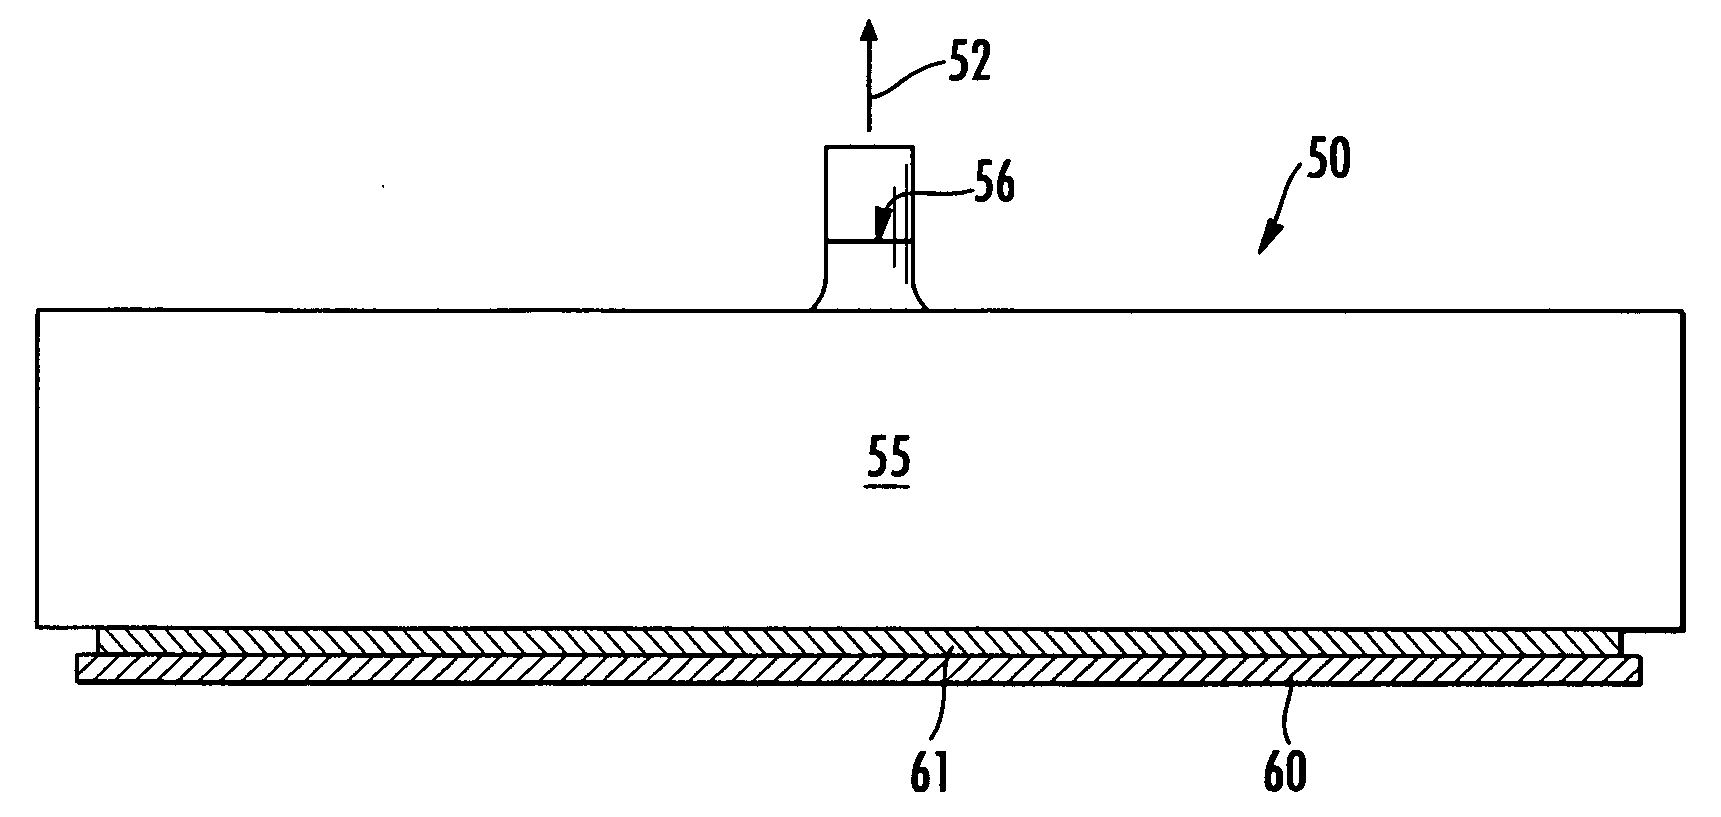 Process and apparatus for atmospheric pressure plasma enhanced chemical vapor deposition coating of a substrate